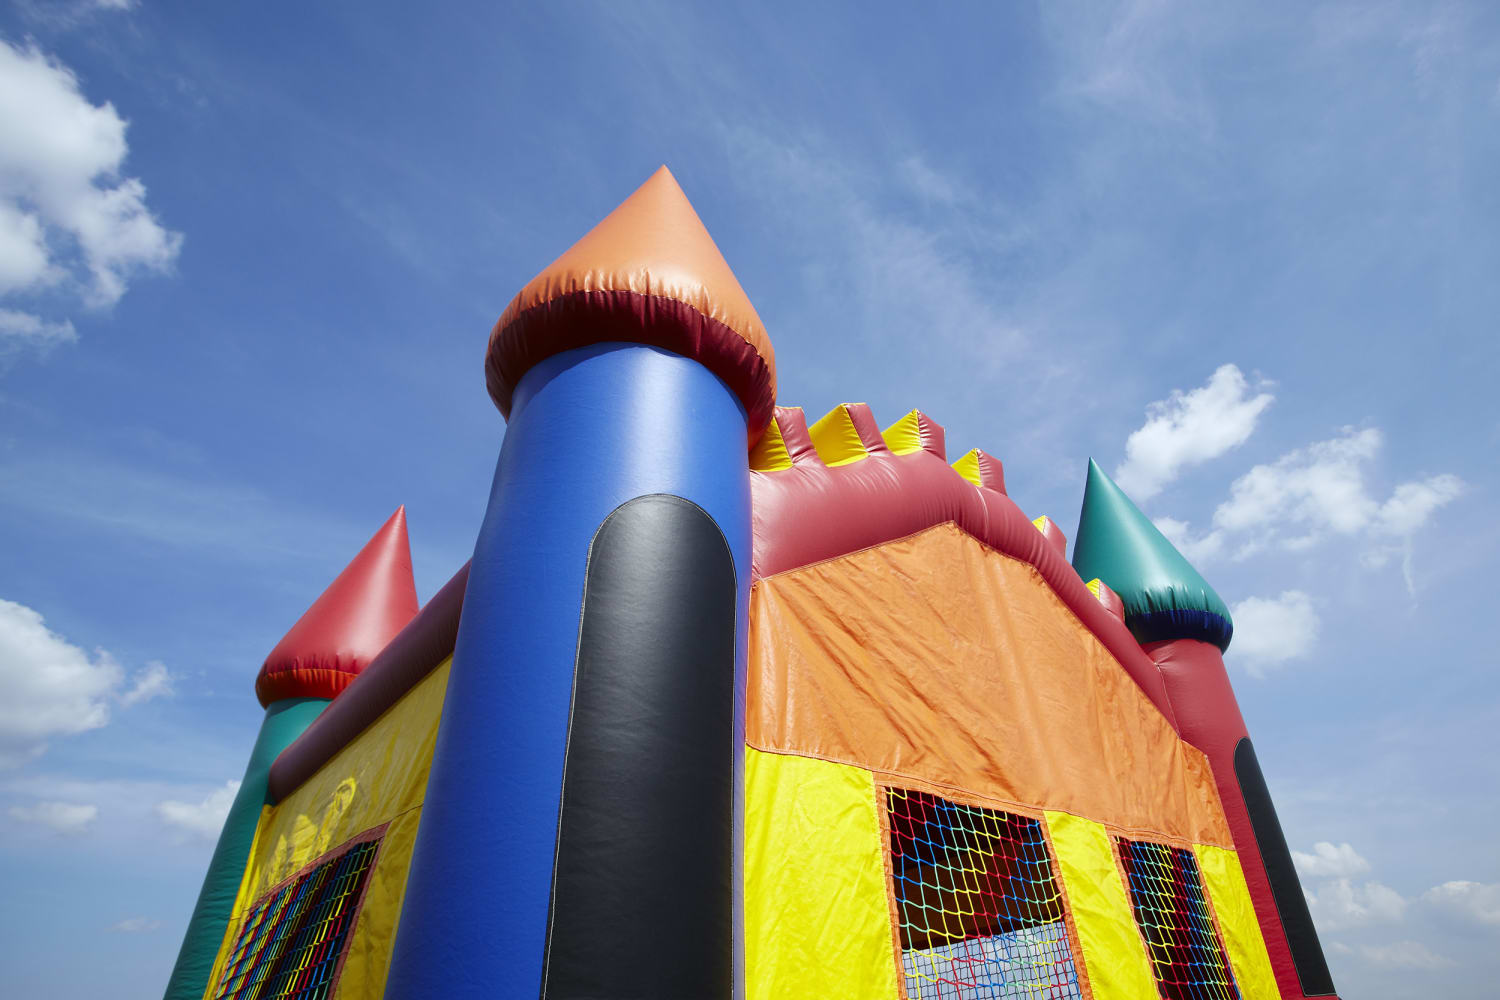 Who Has The Best Professional Bounce House?